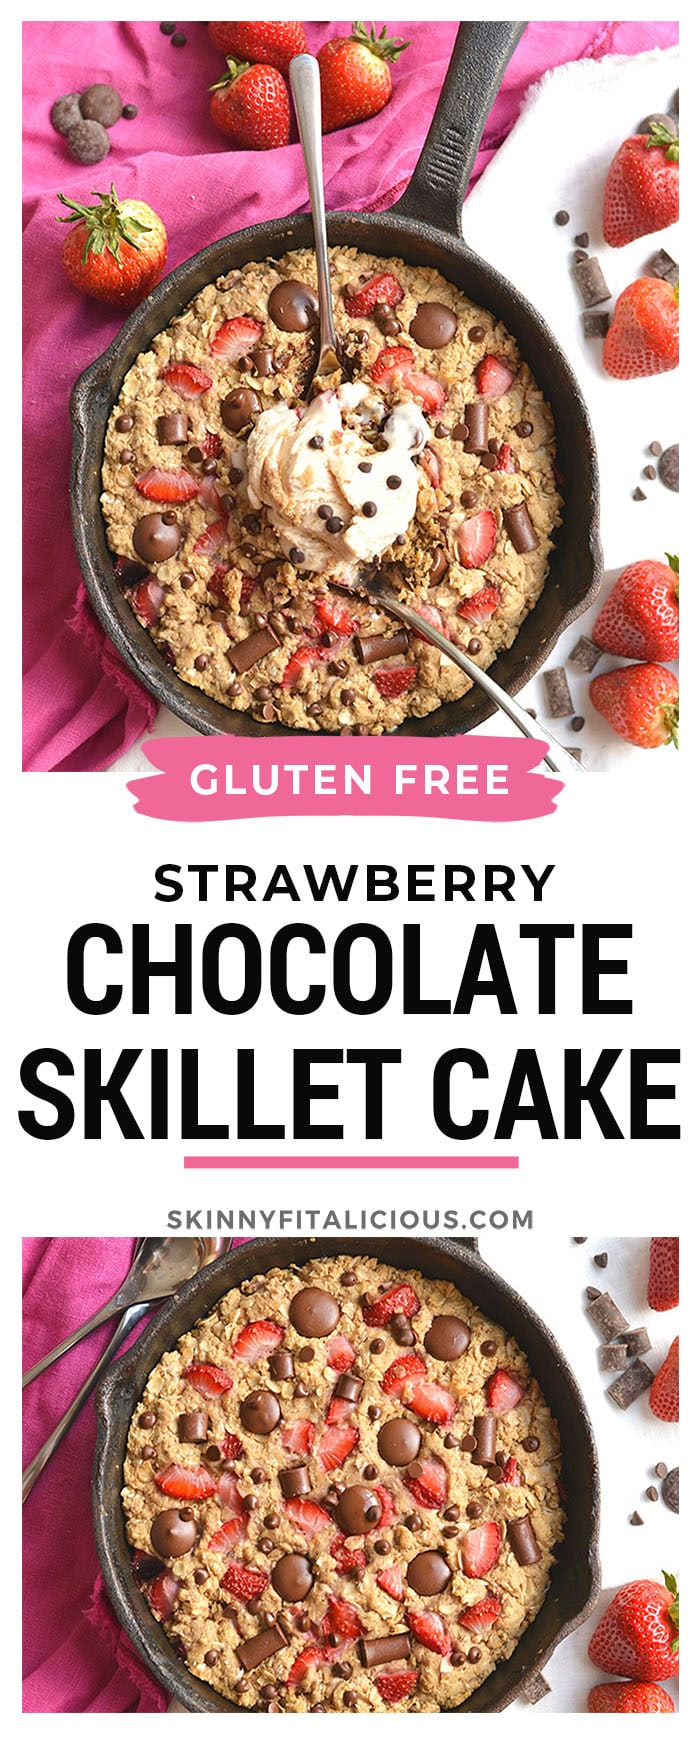 Chocolatey Strawberry Chocolate Chip Skillet Cake! Low sugar & made with healthier, wholesome ingredients, you will fall in love with this indulgent weight watcher friendly dessert! Gluten Free + Low Calorie